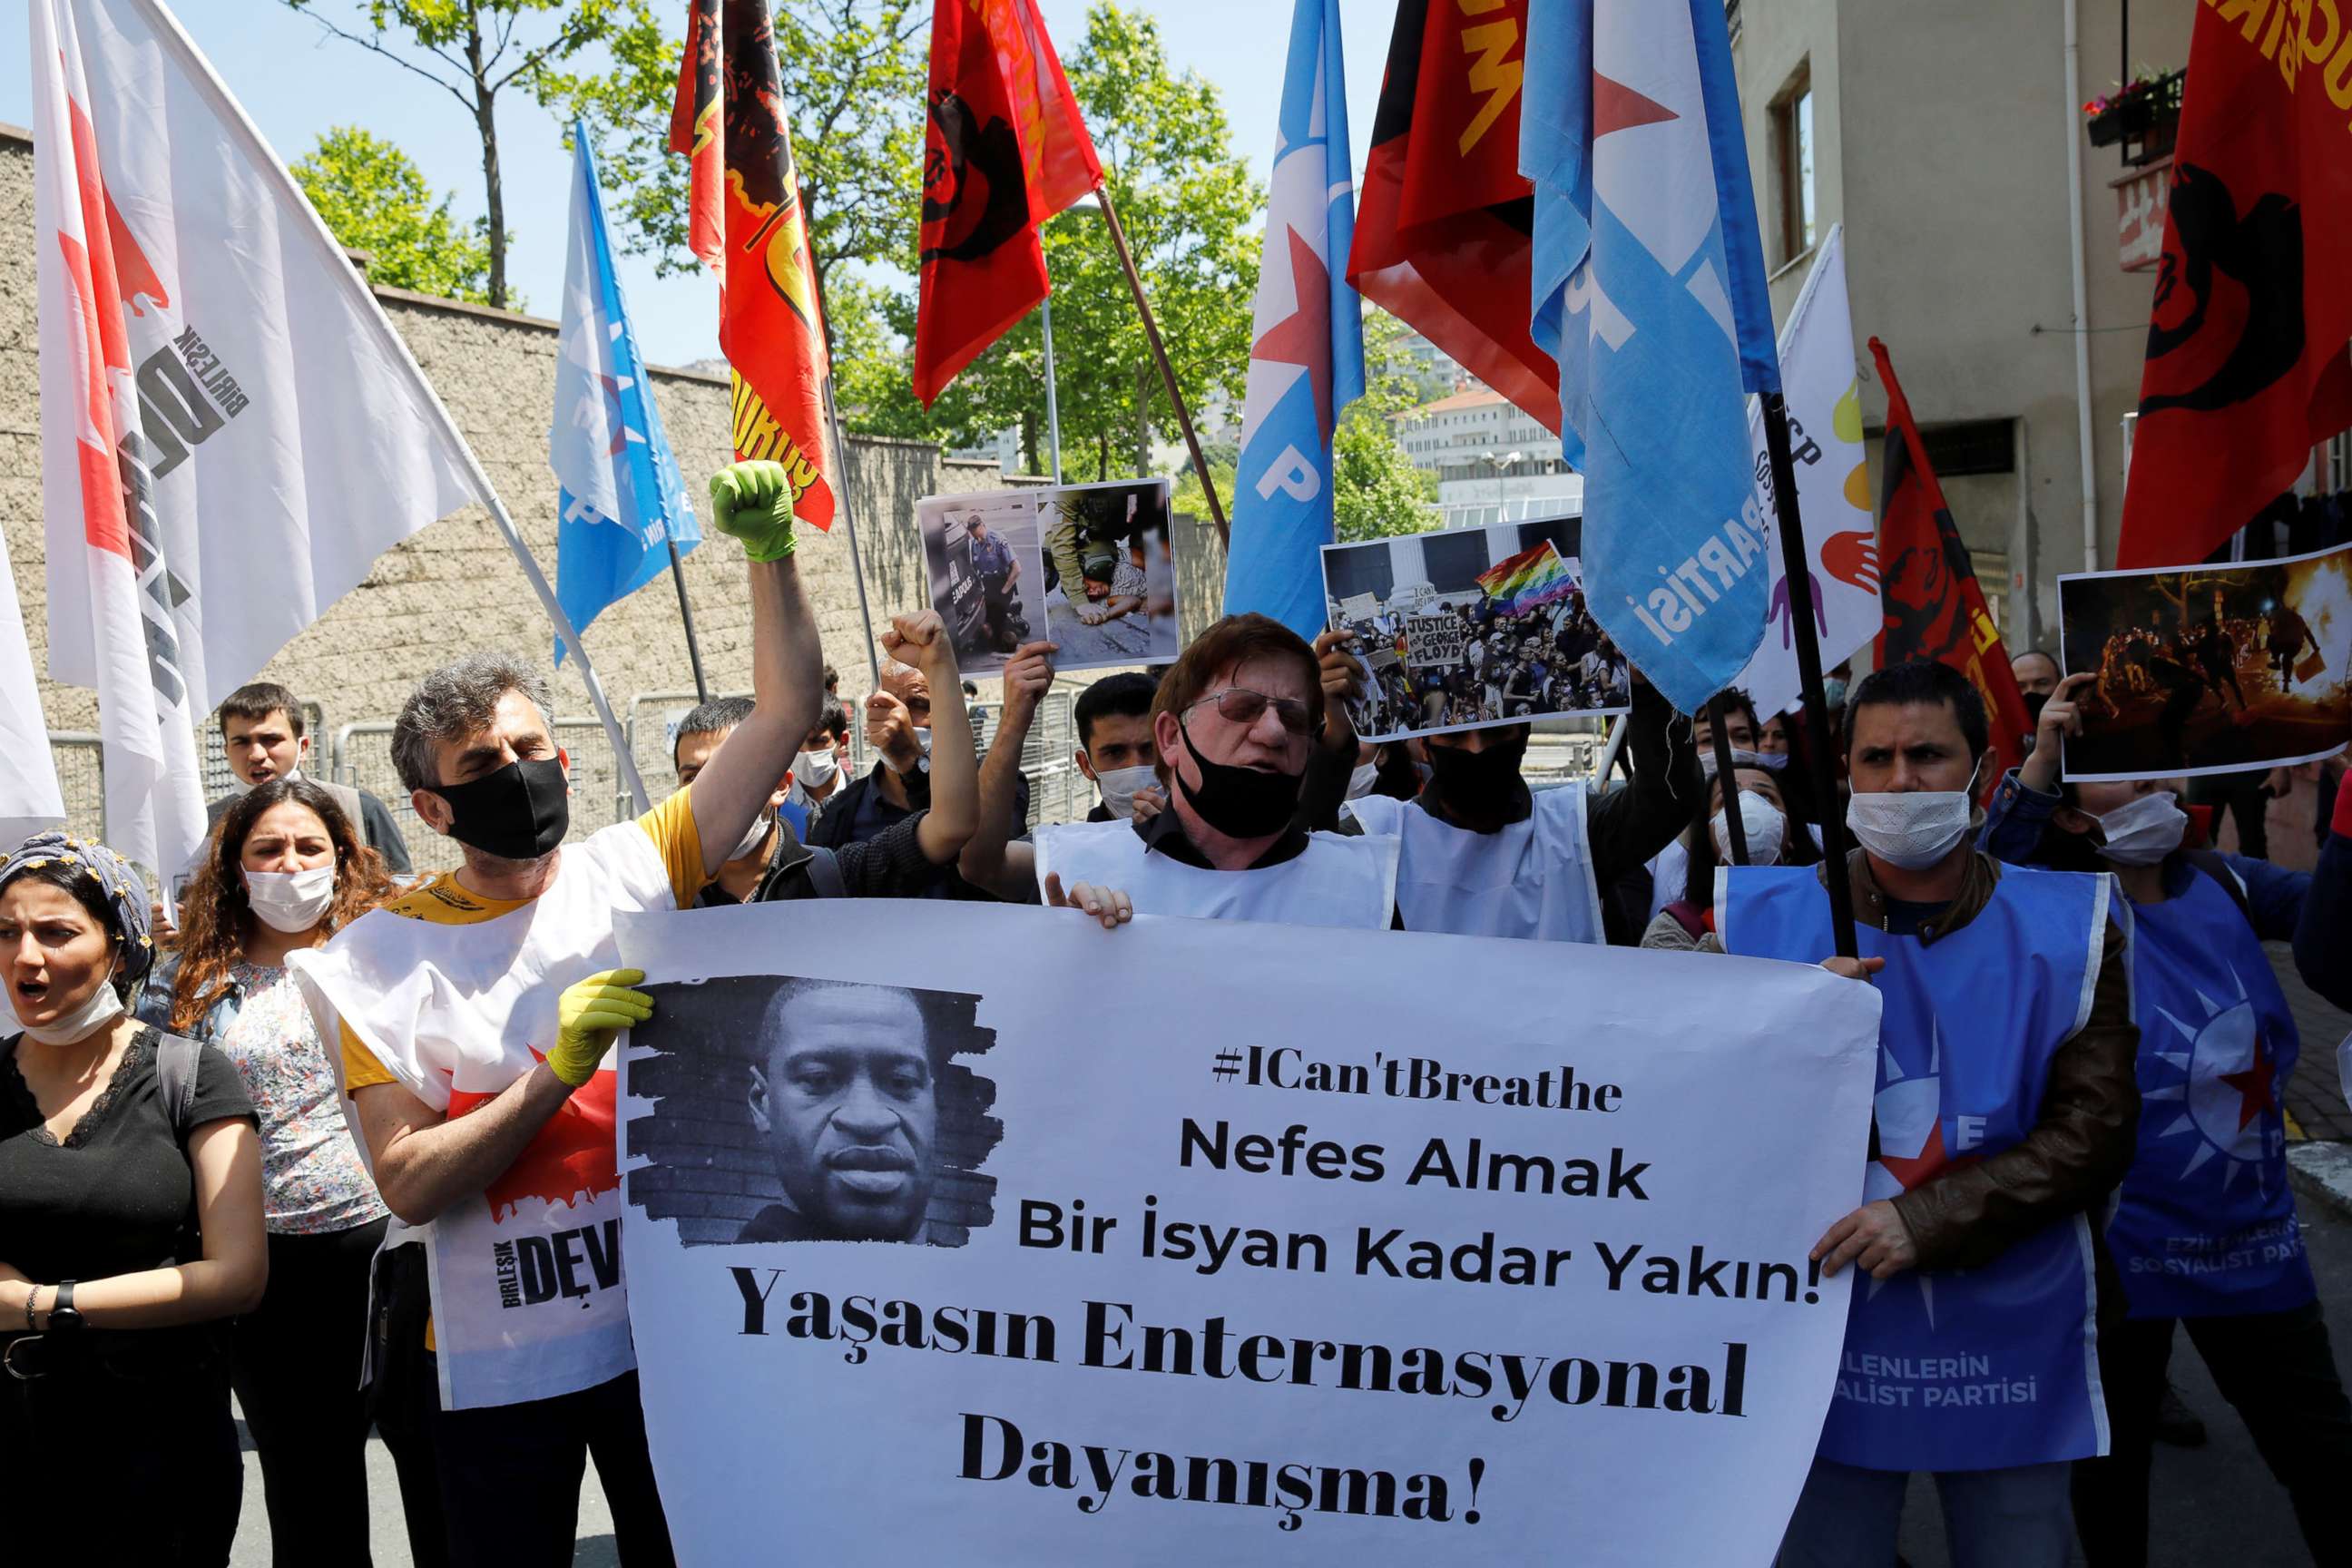 PHOTO: Demonstrators protest over the death of African-American man George Floyd in Minneapolis police custody, in front of the U.S. consulate in Istanbul, Turkey, June 4, 2020.